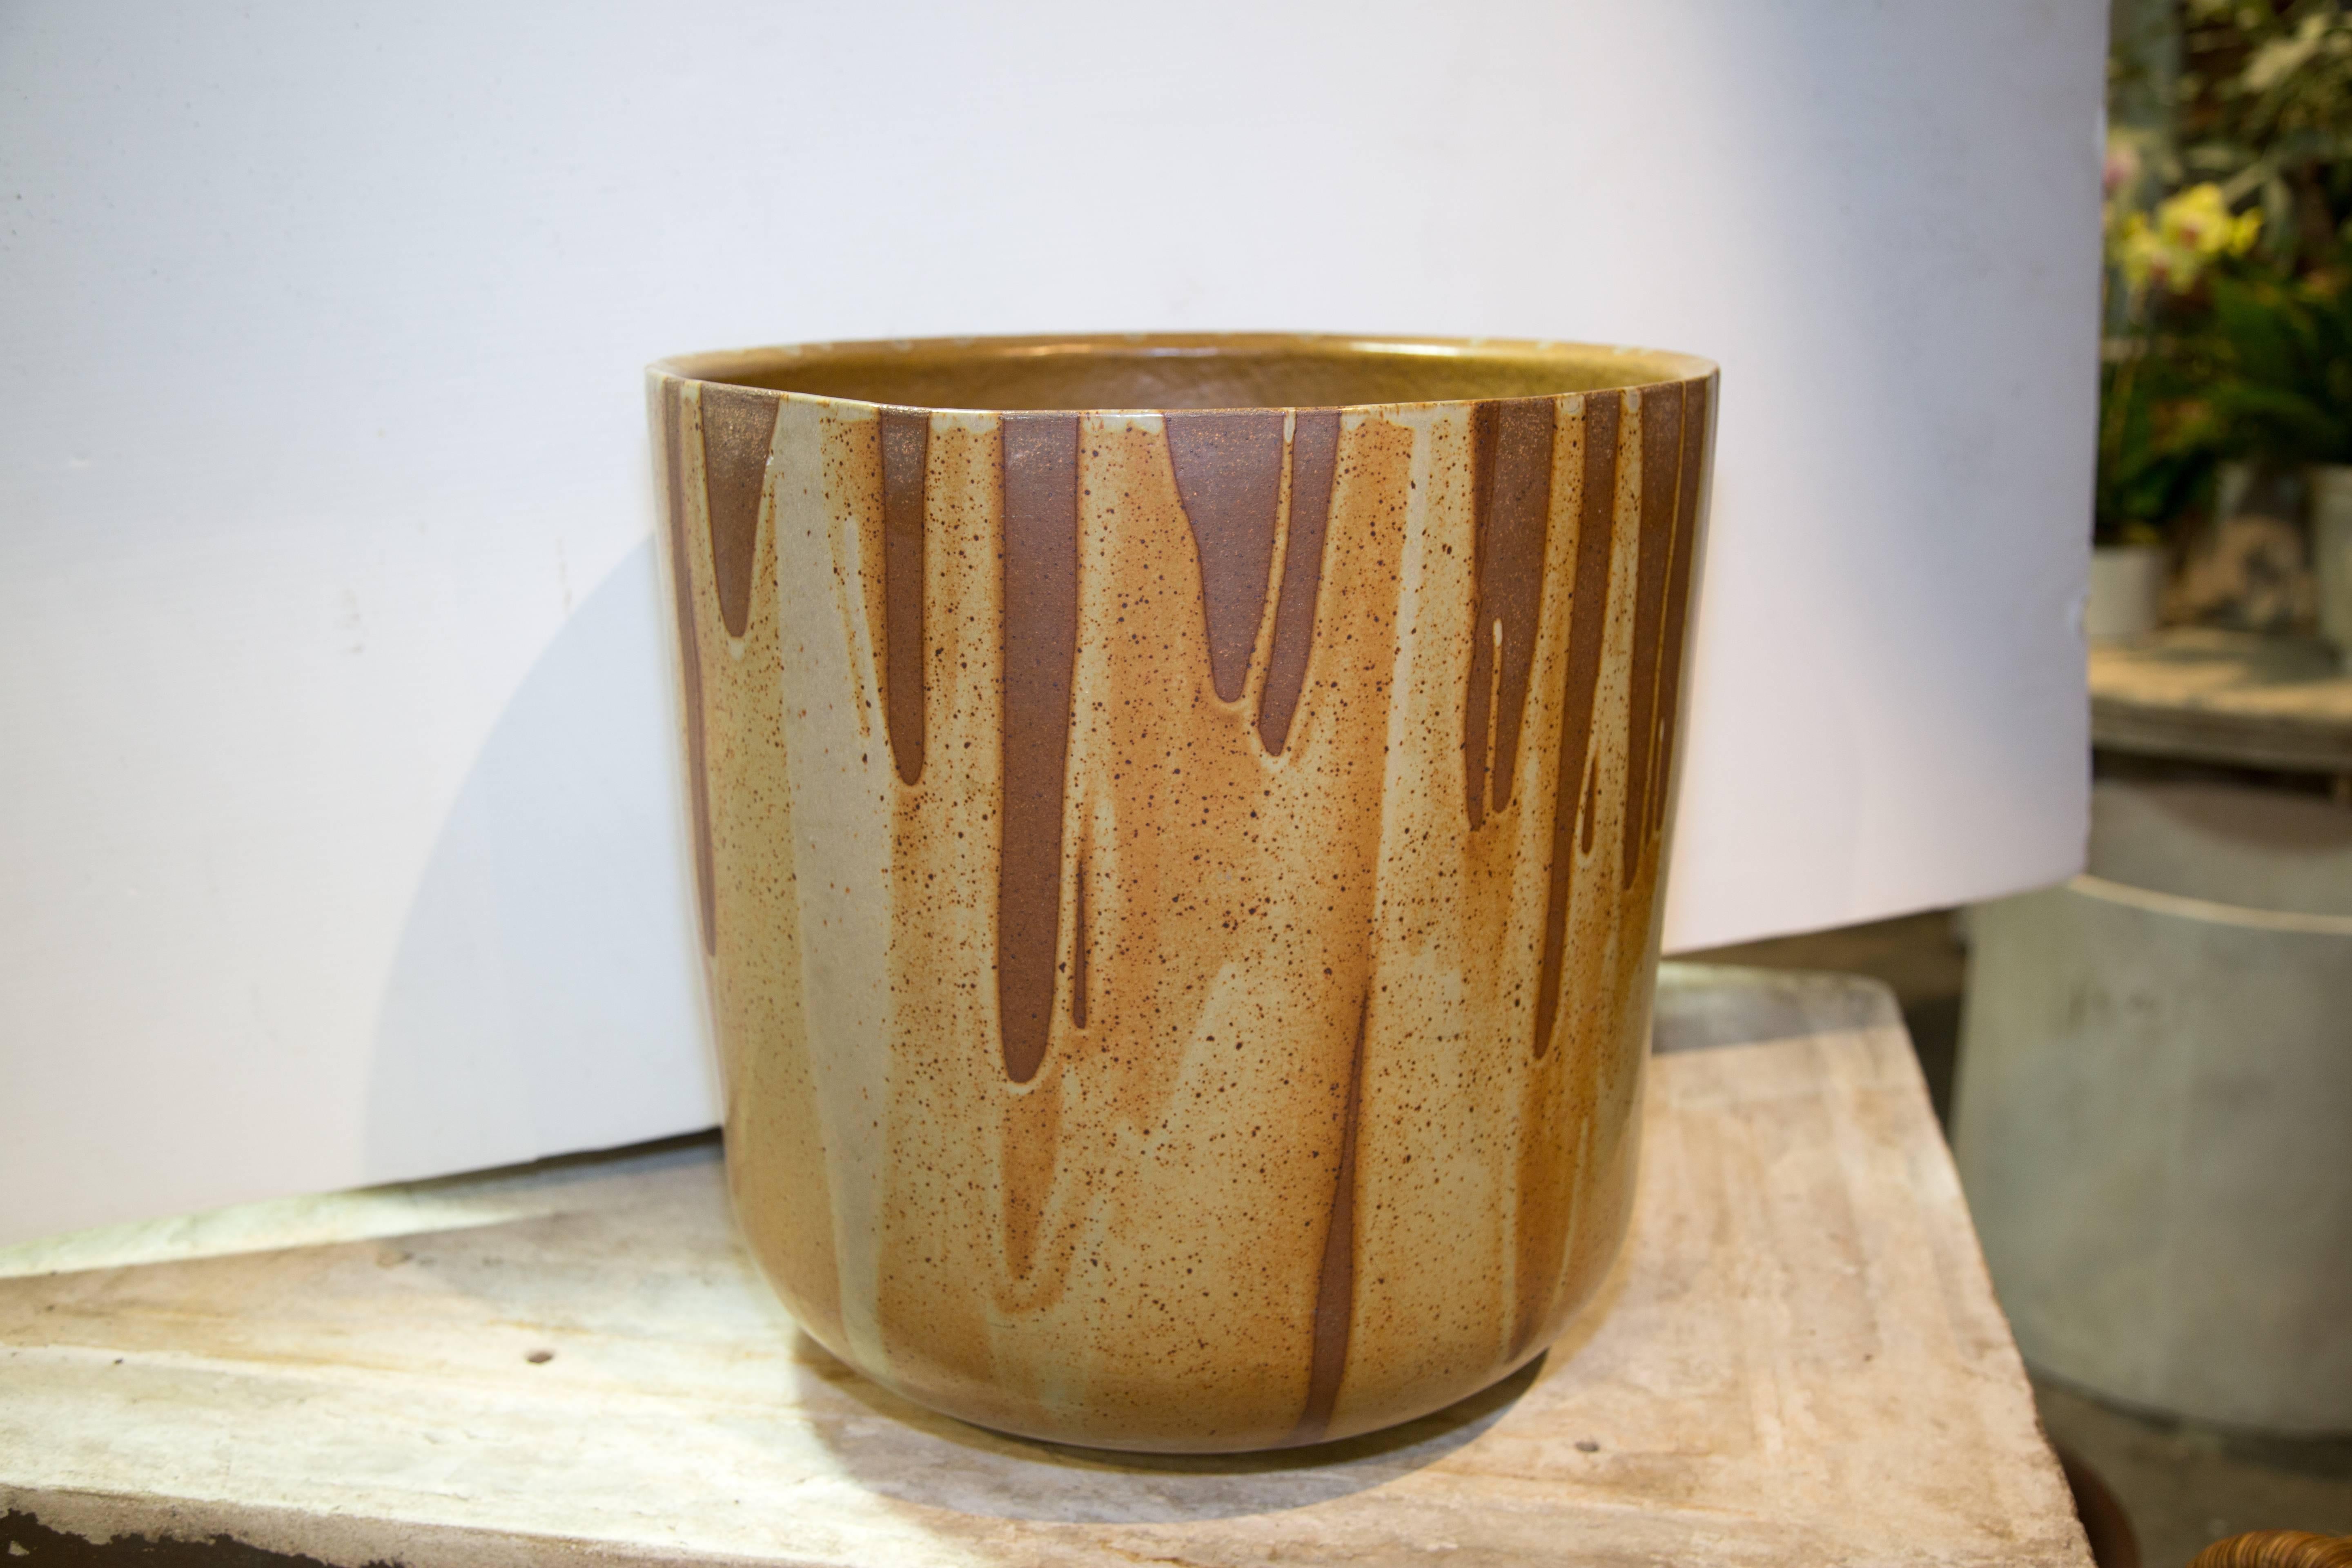 Mid-Century American modern flame glazed ceramic planter by David Cressey
1960 
Measures: 17" D x 16.5" H 
$6,250.00.